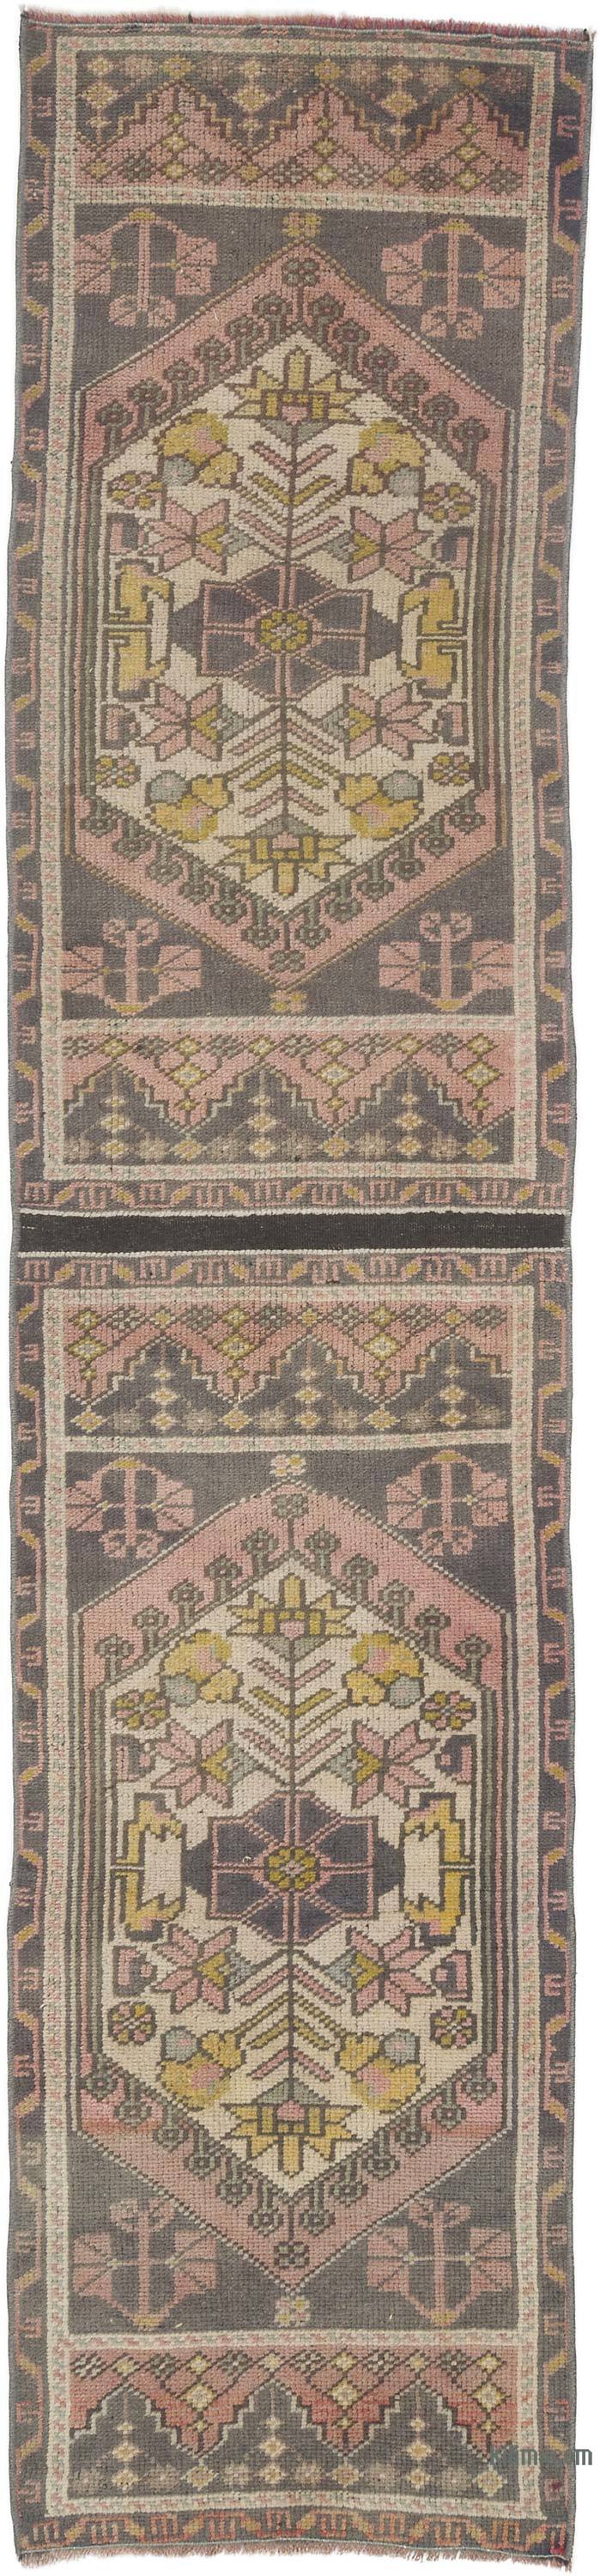 Vintage Turkish Hand-Knotted Runner - 1' 9" x 7' 11" (21 in. x 95 in.) - K0057741